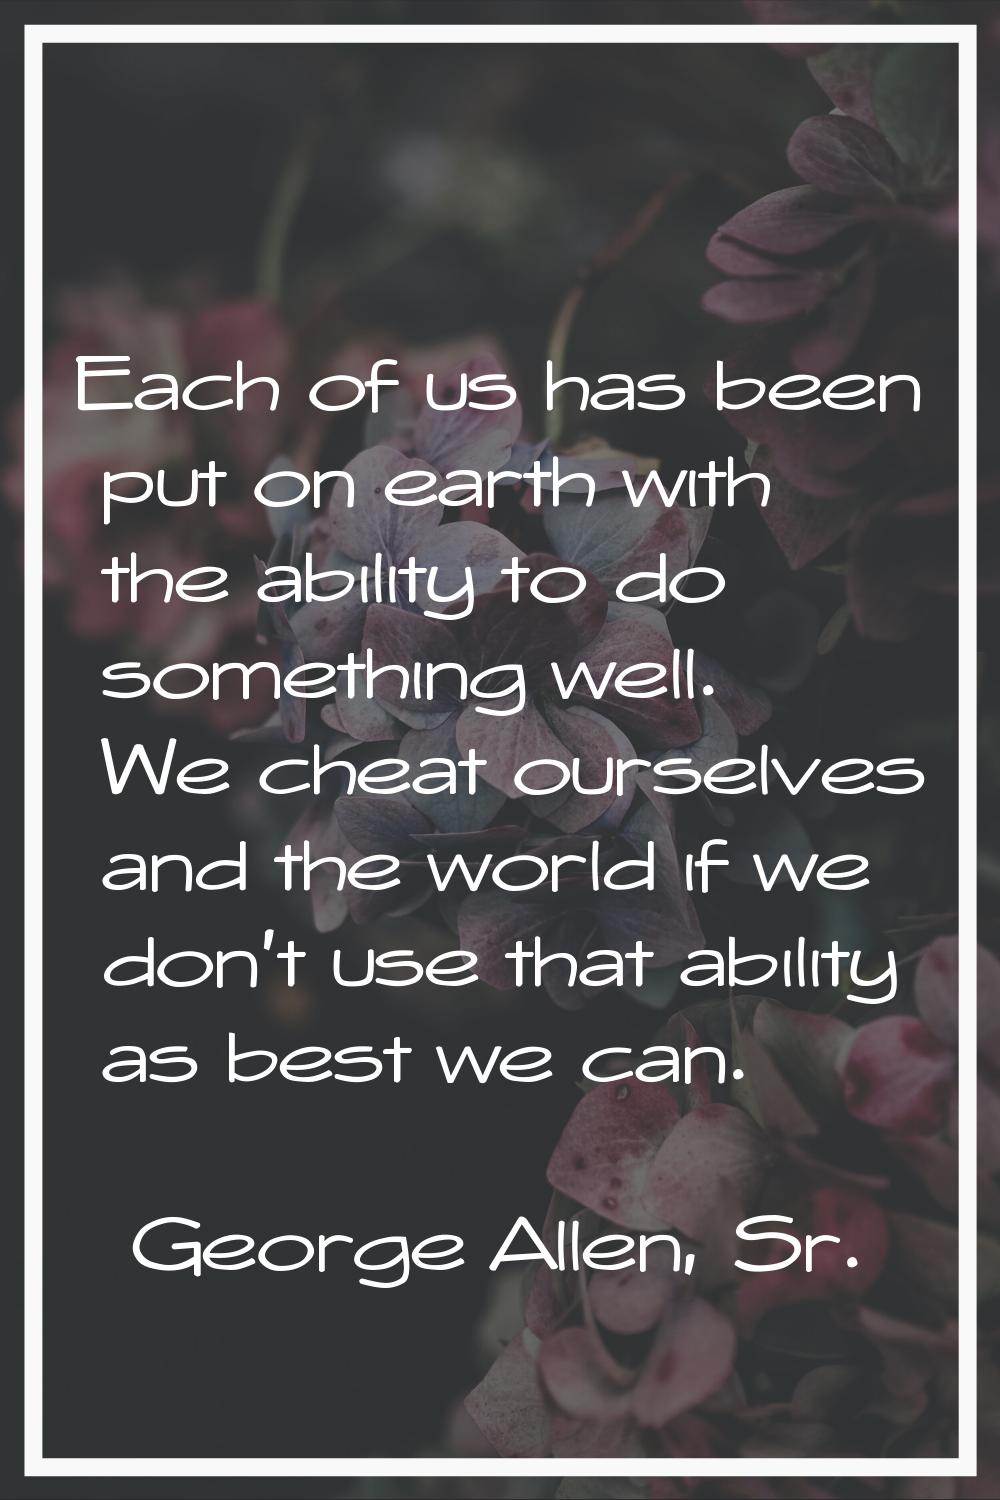 Each of us has been put on earth with the ability to do something well. We cheat ourselves and the 